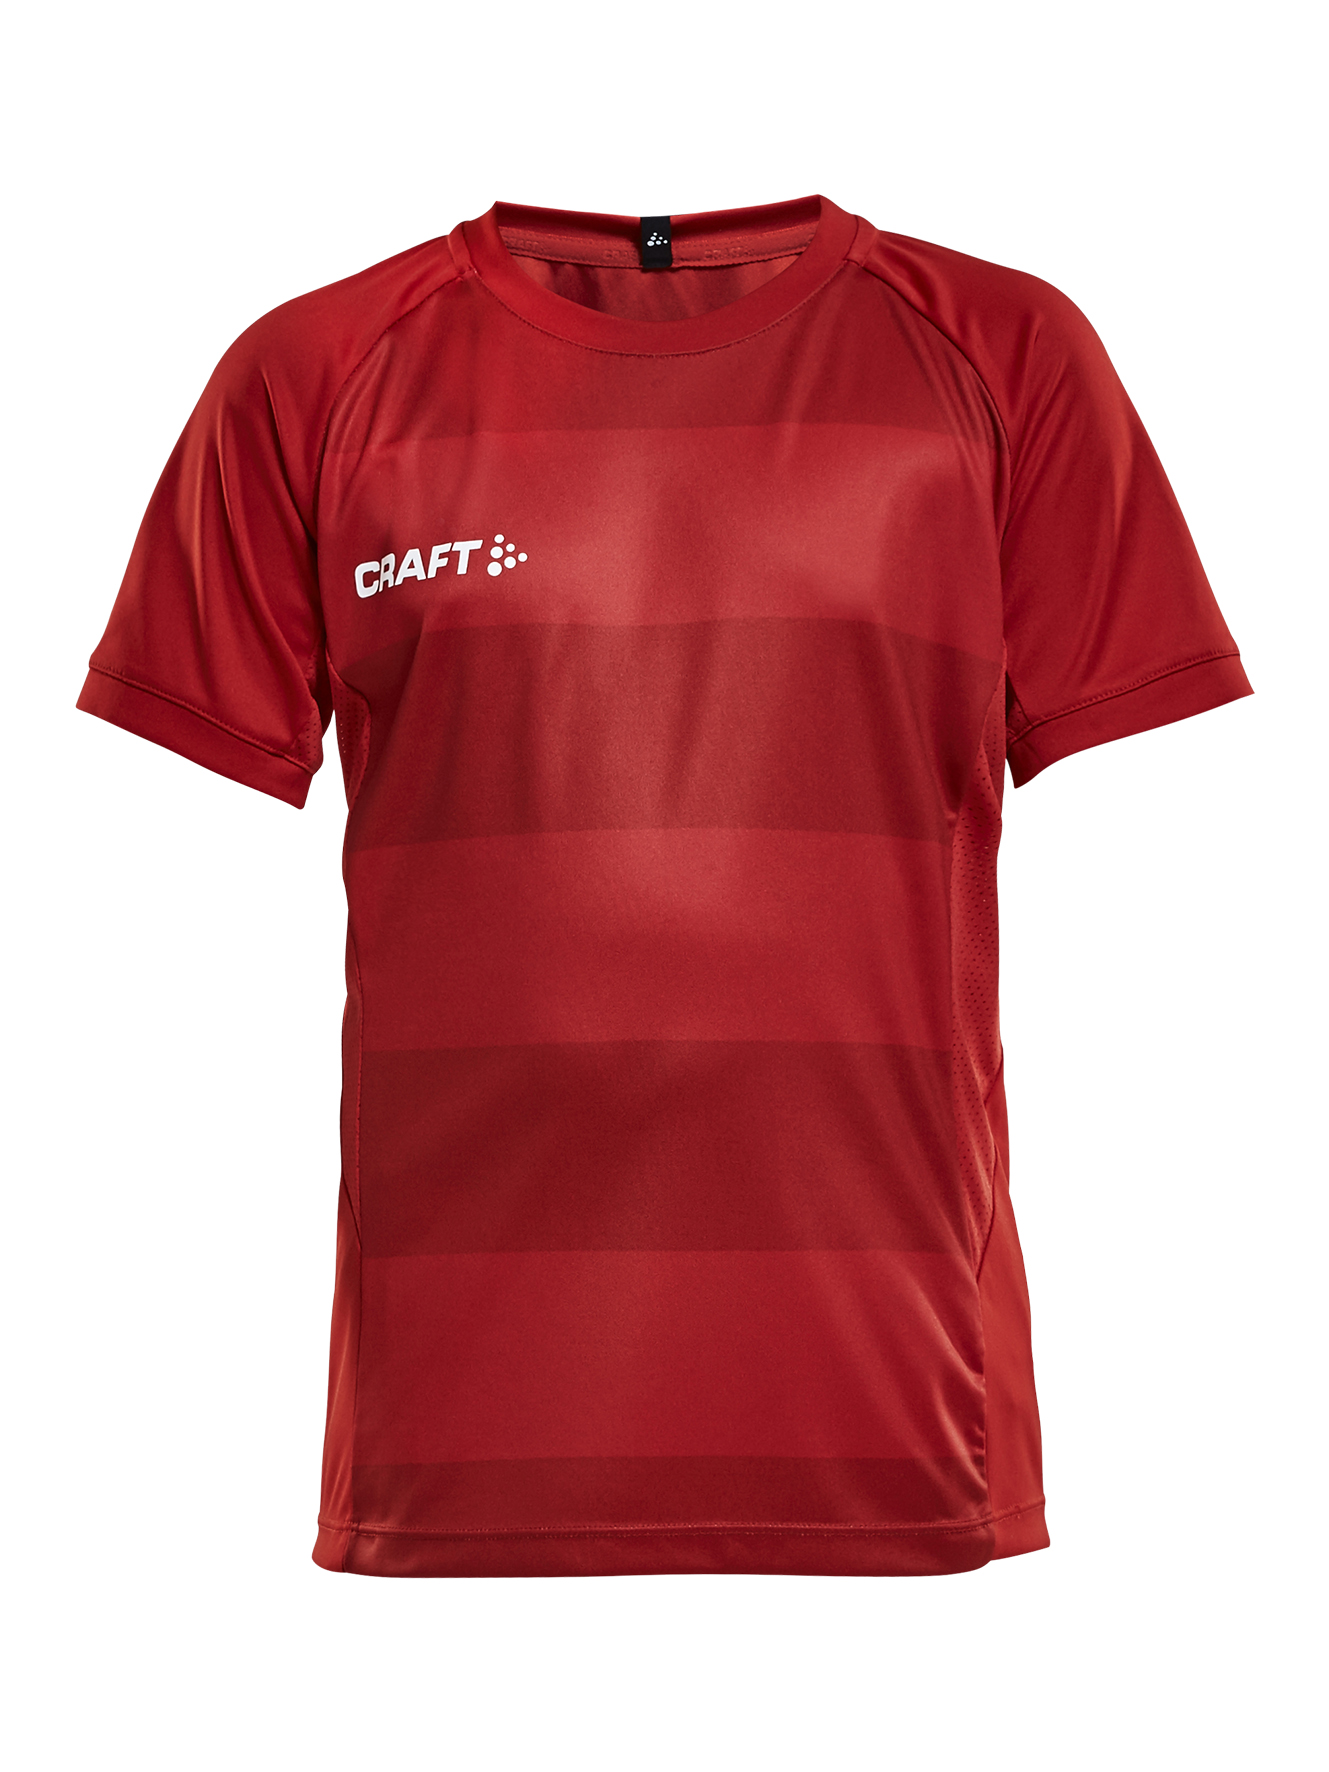 Craft PROGRESS Jersey Graphic JR BRIGHT RED  (TONE IN TONE)